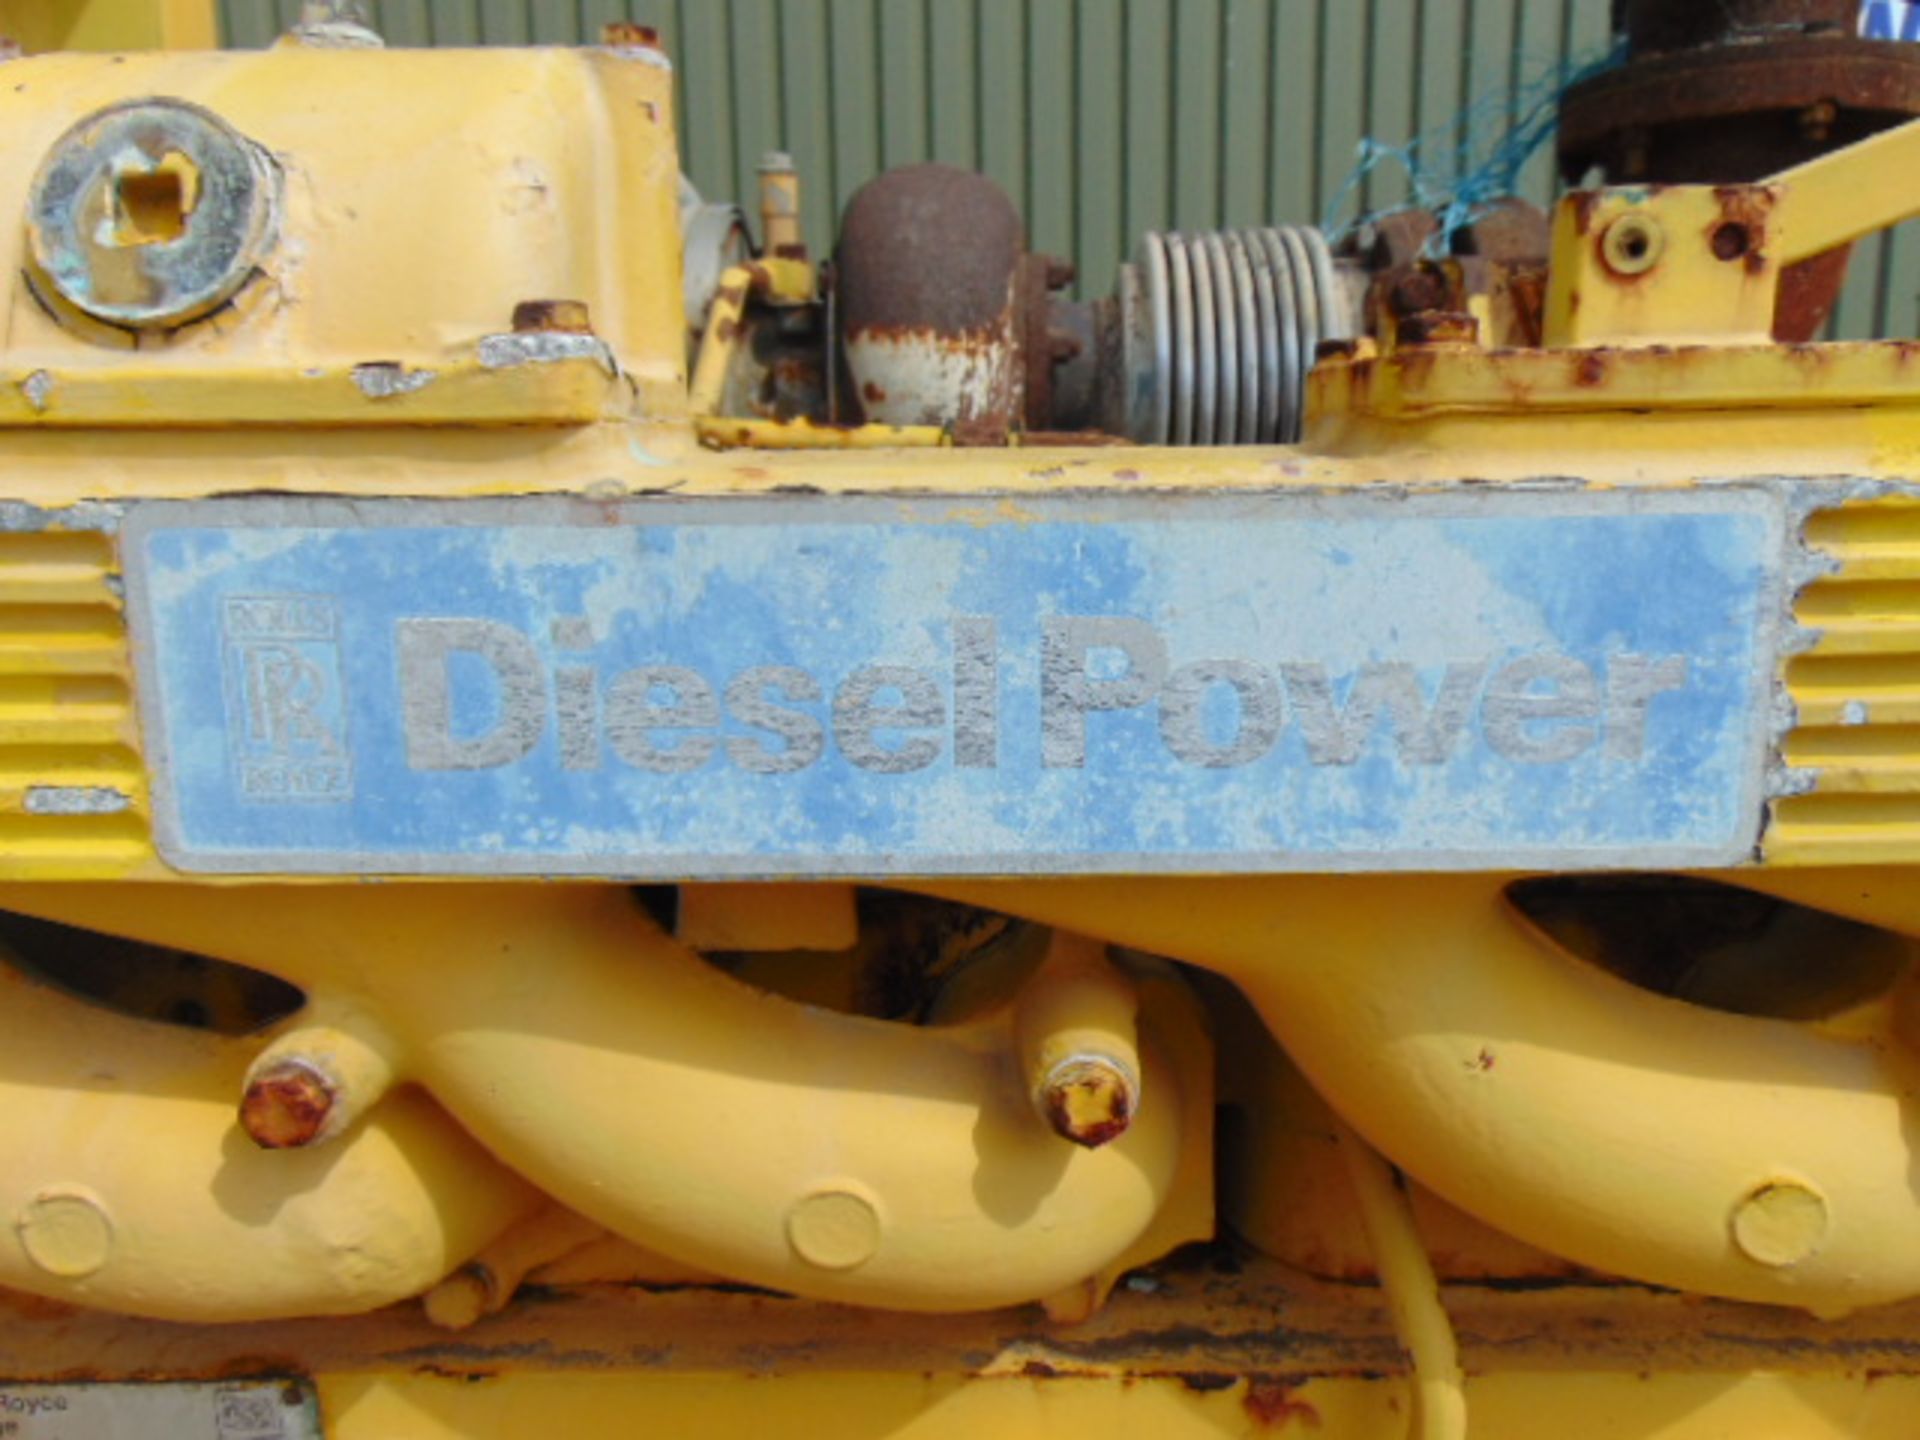 Rolls Royce Diesel Powered Newage Stamford 125KVA Generator with control panel ONLY 280 HOURS! - Image 11 of 21